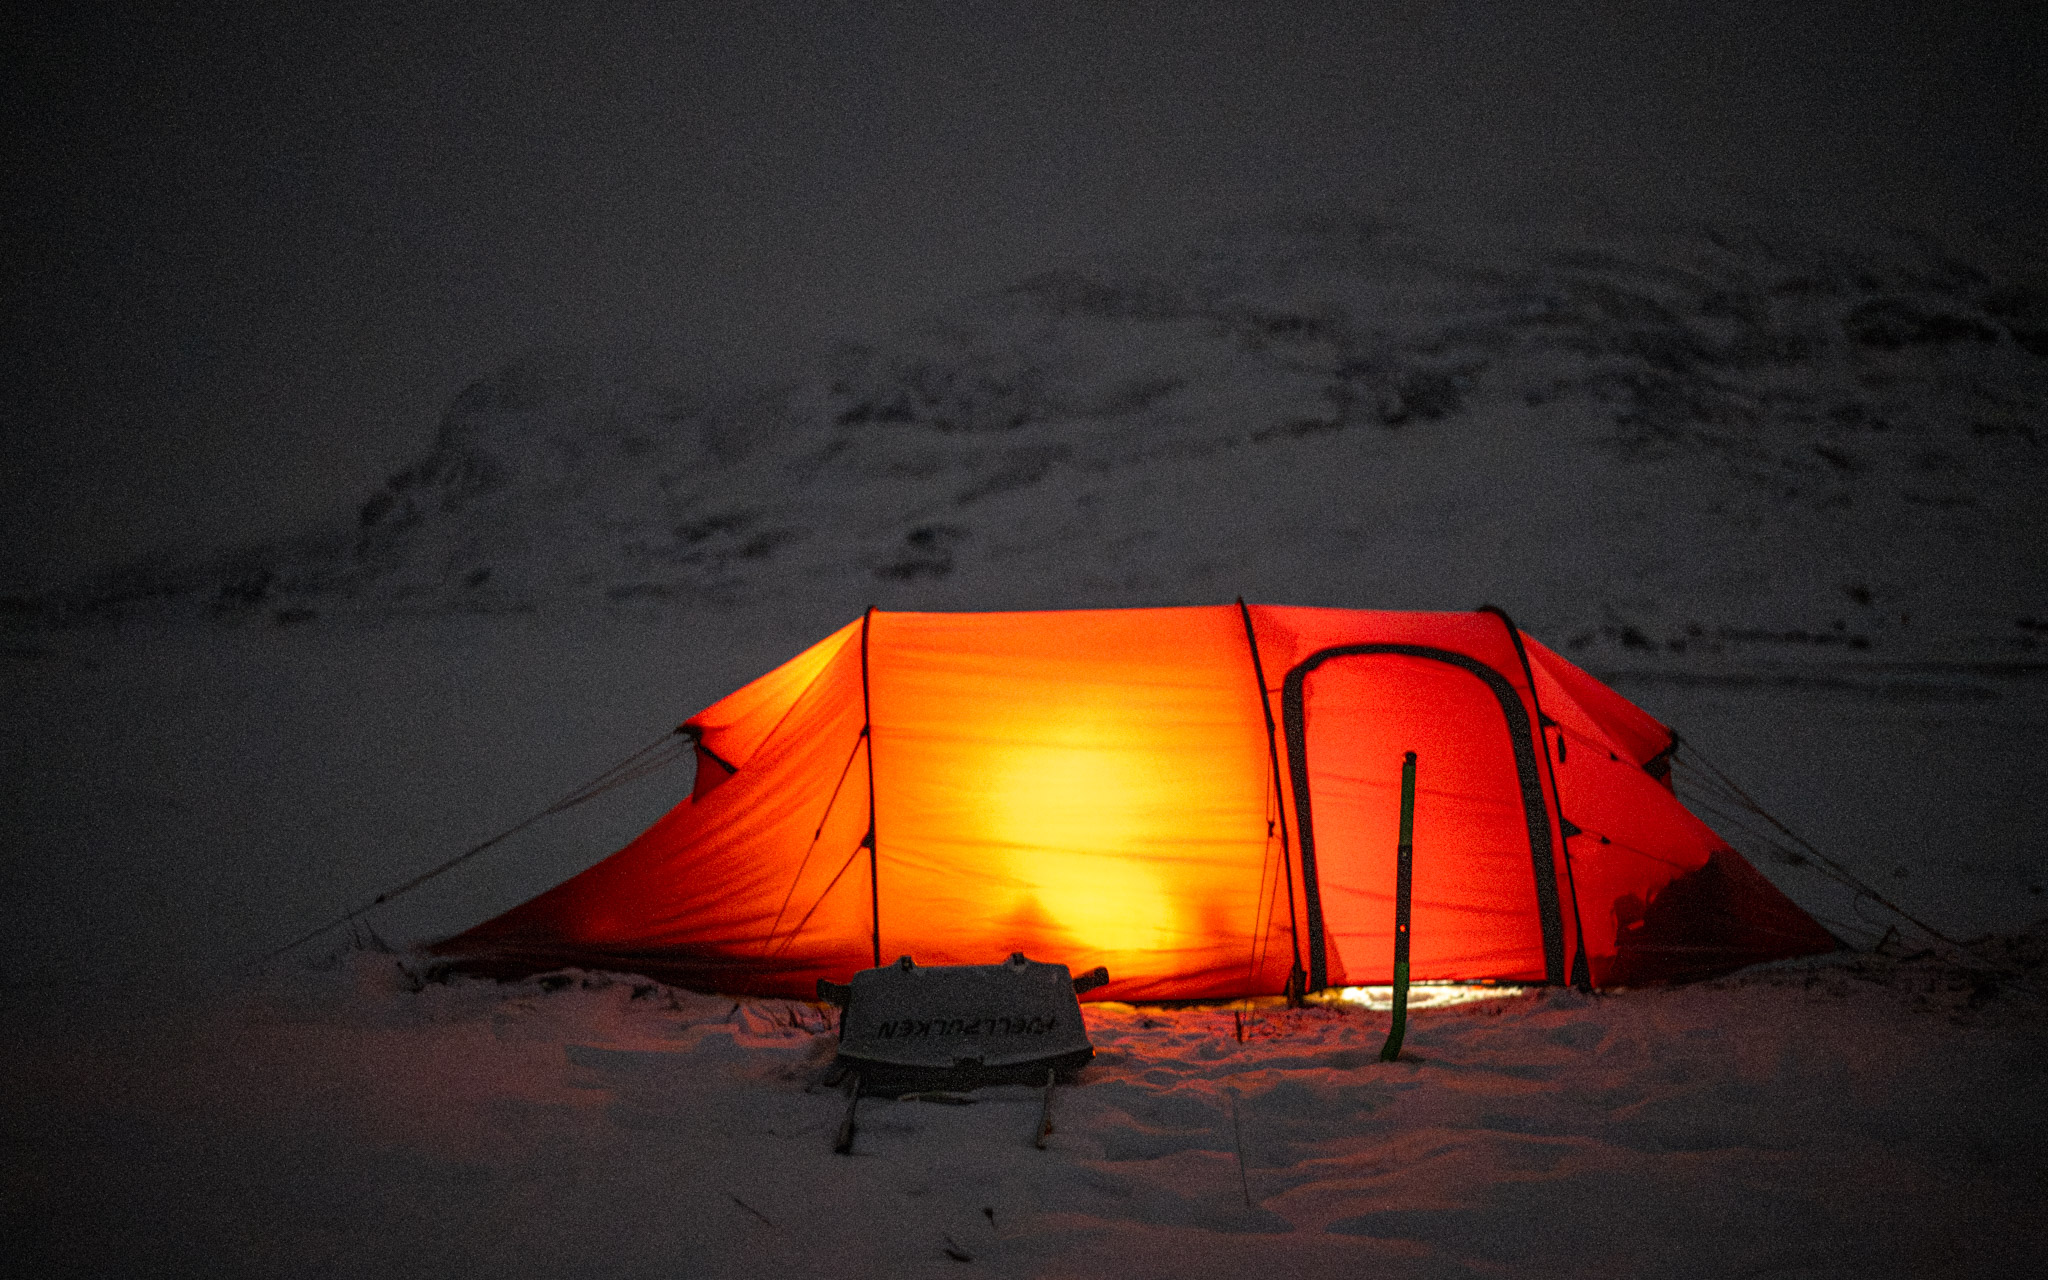 Winter camping on Kungsleden is an unforgettable experience